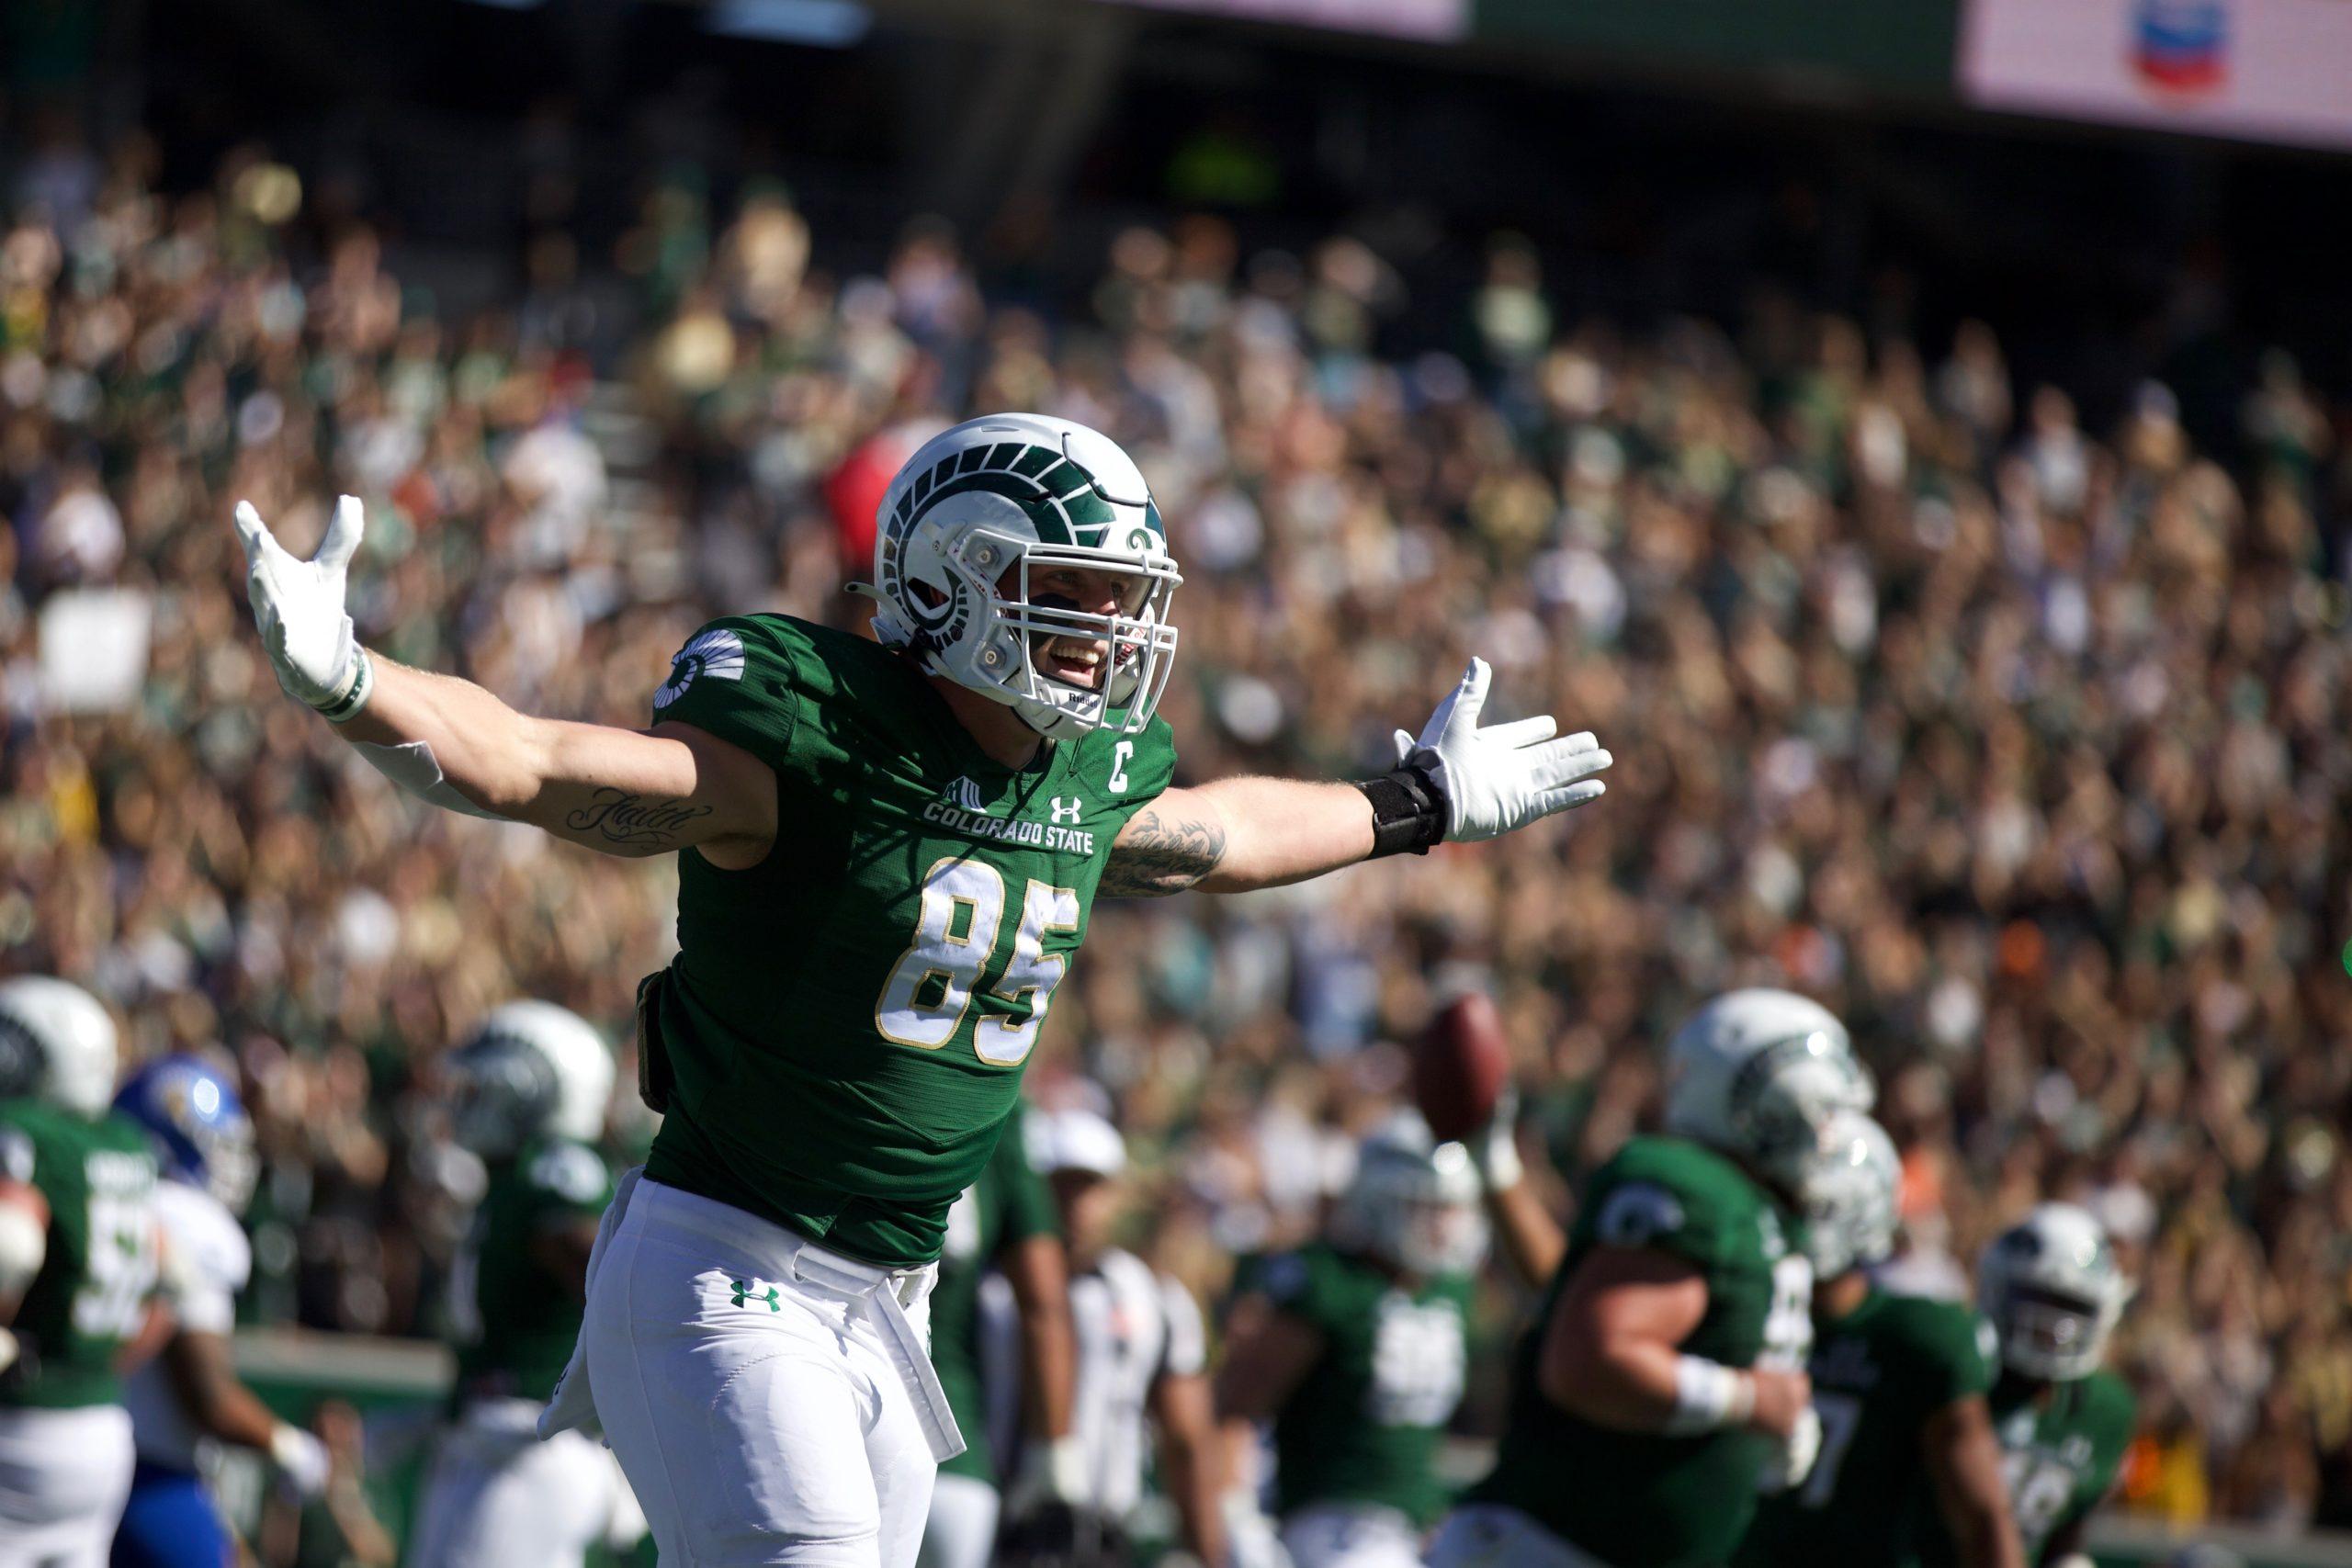 Trey McBride celebrates after an early Colorado State touchdown Oct. 9.